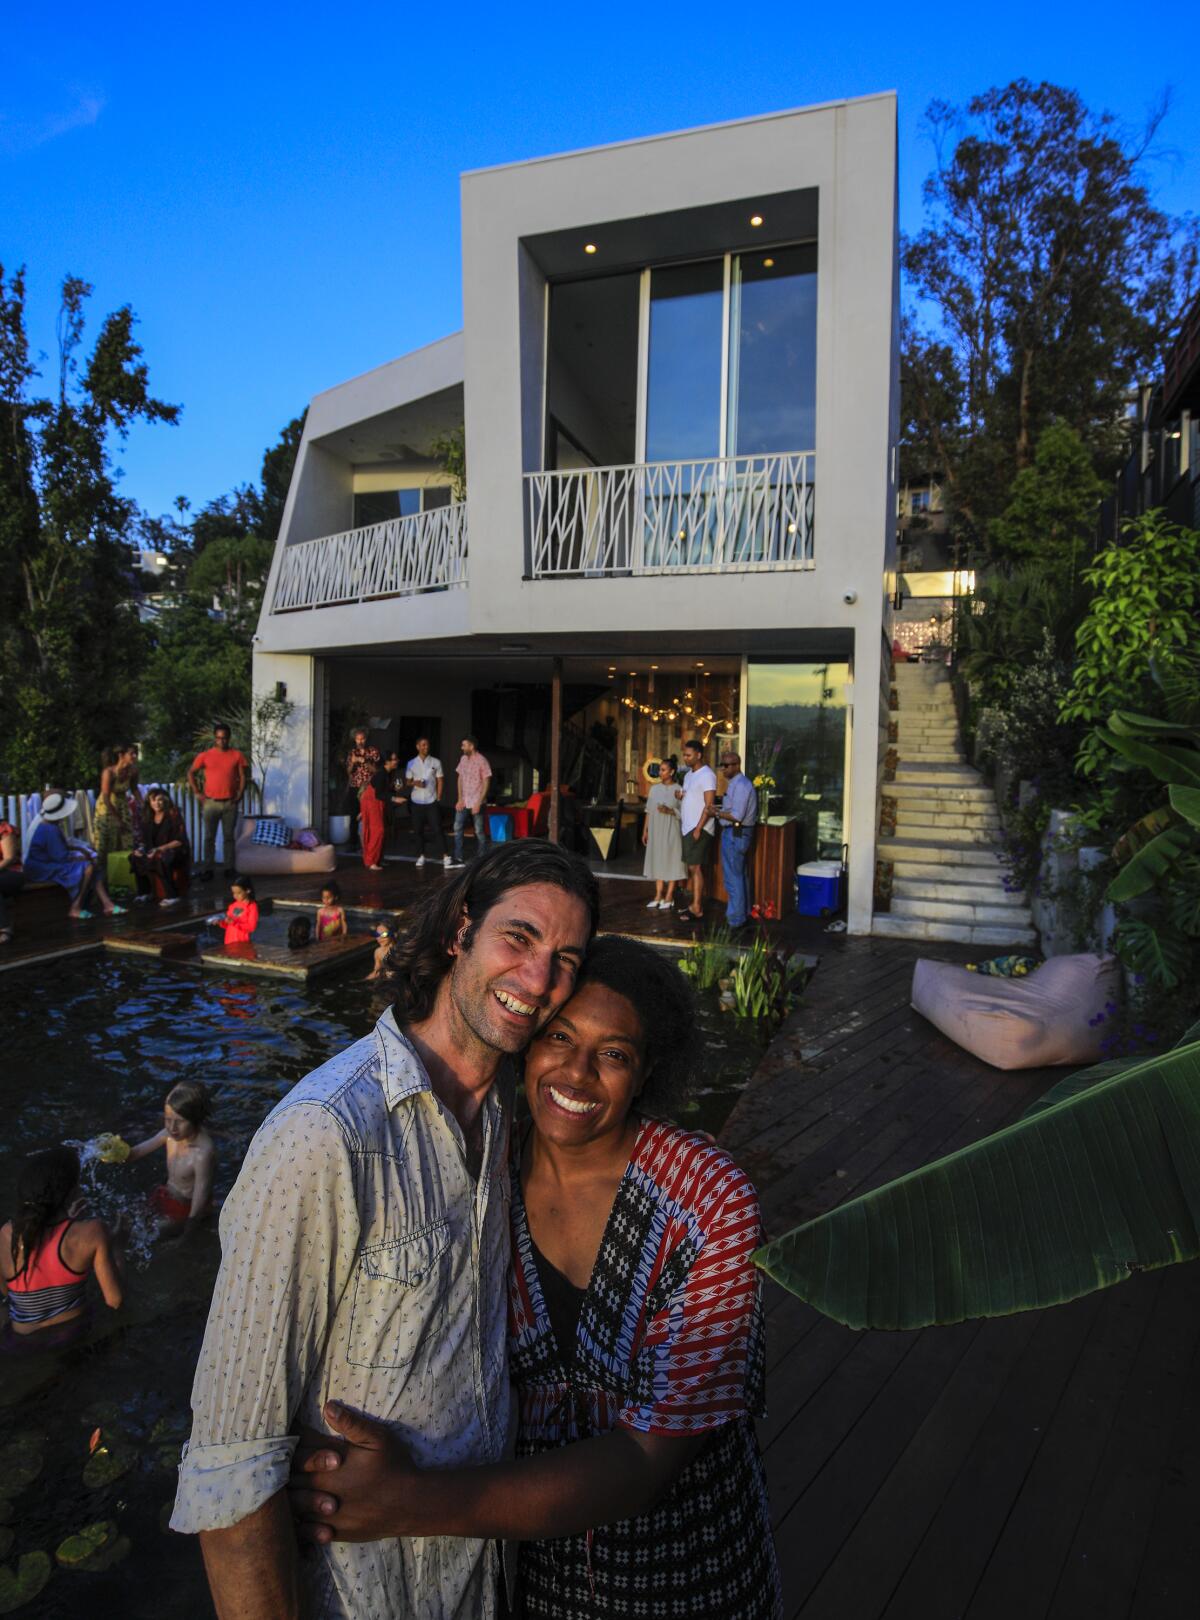 Every Sunday, Diego and Resa Caivano open their Silver Lake home for dinner, a weekly tradition that offers the community a place to connect.